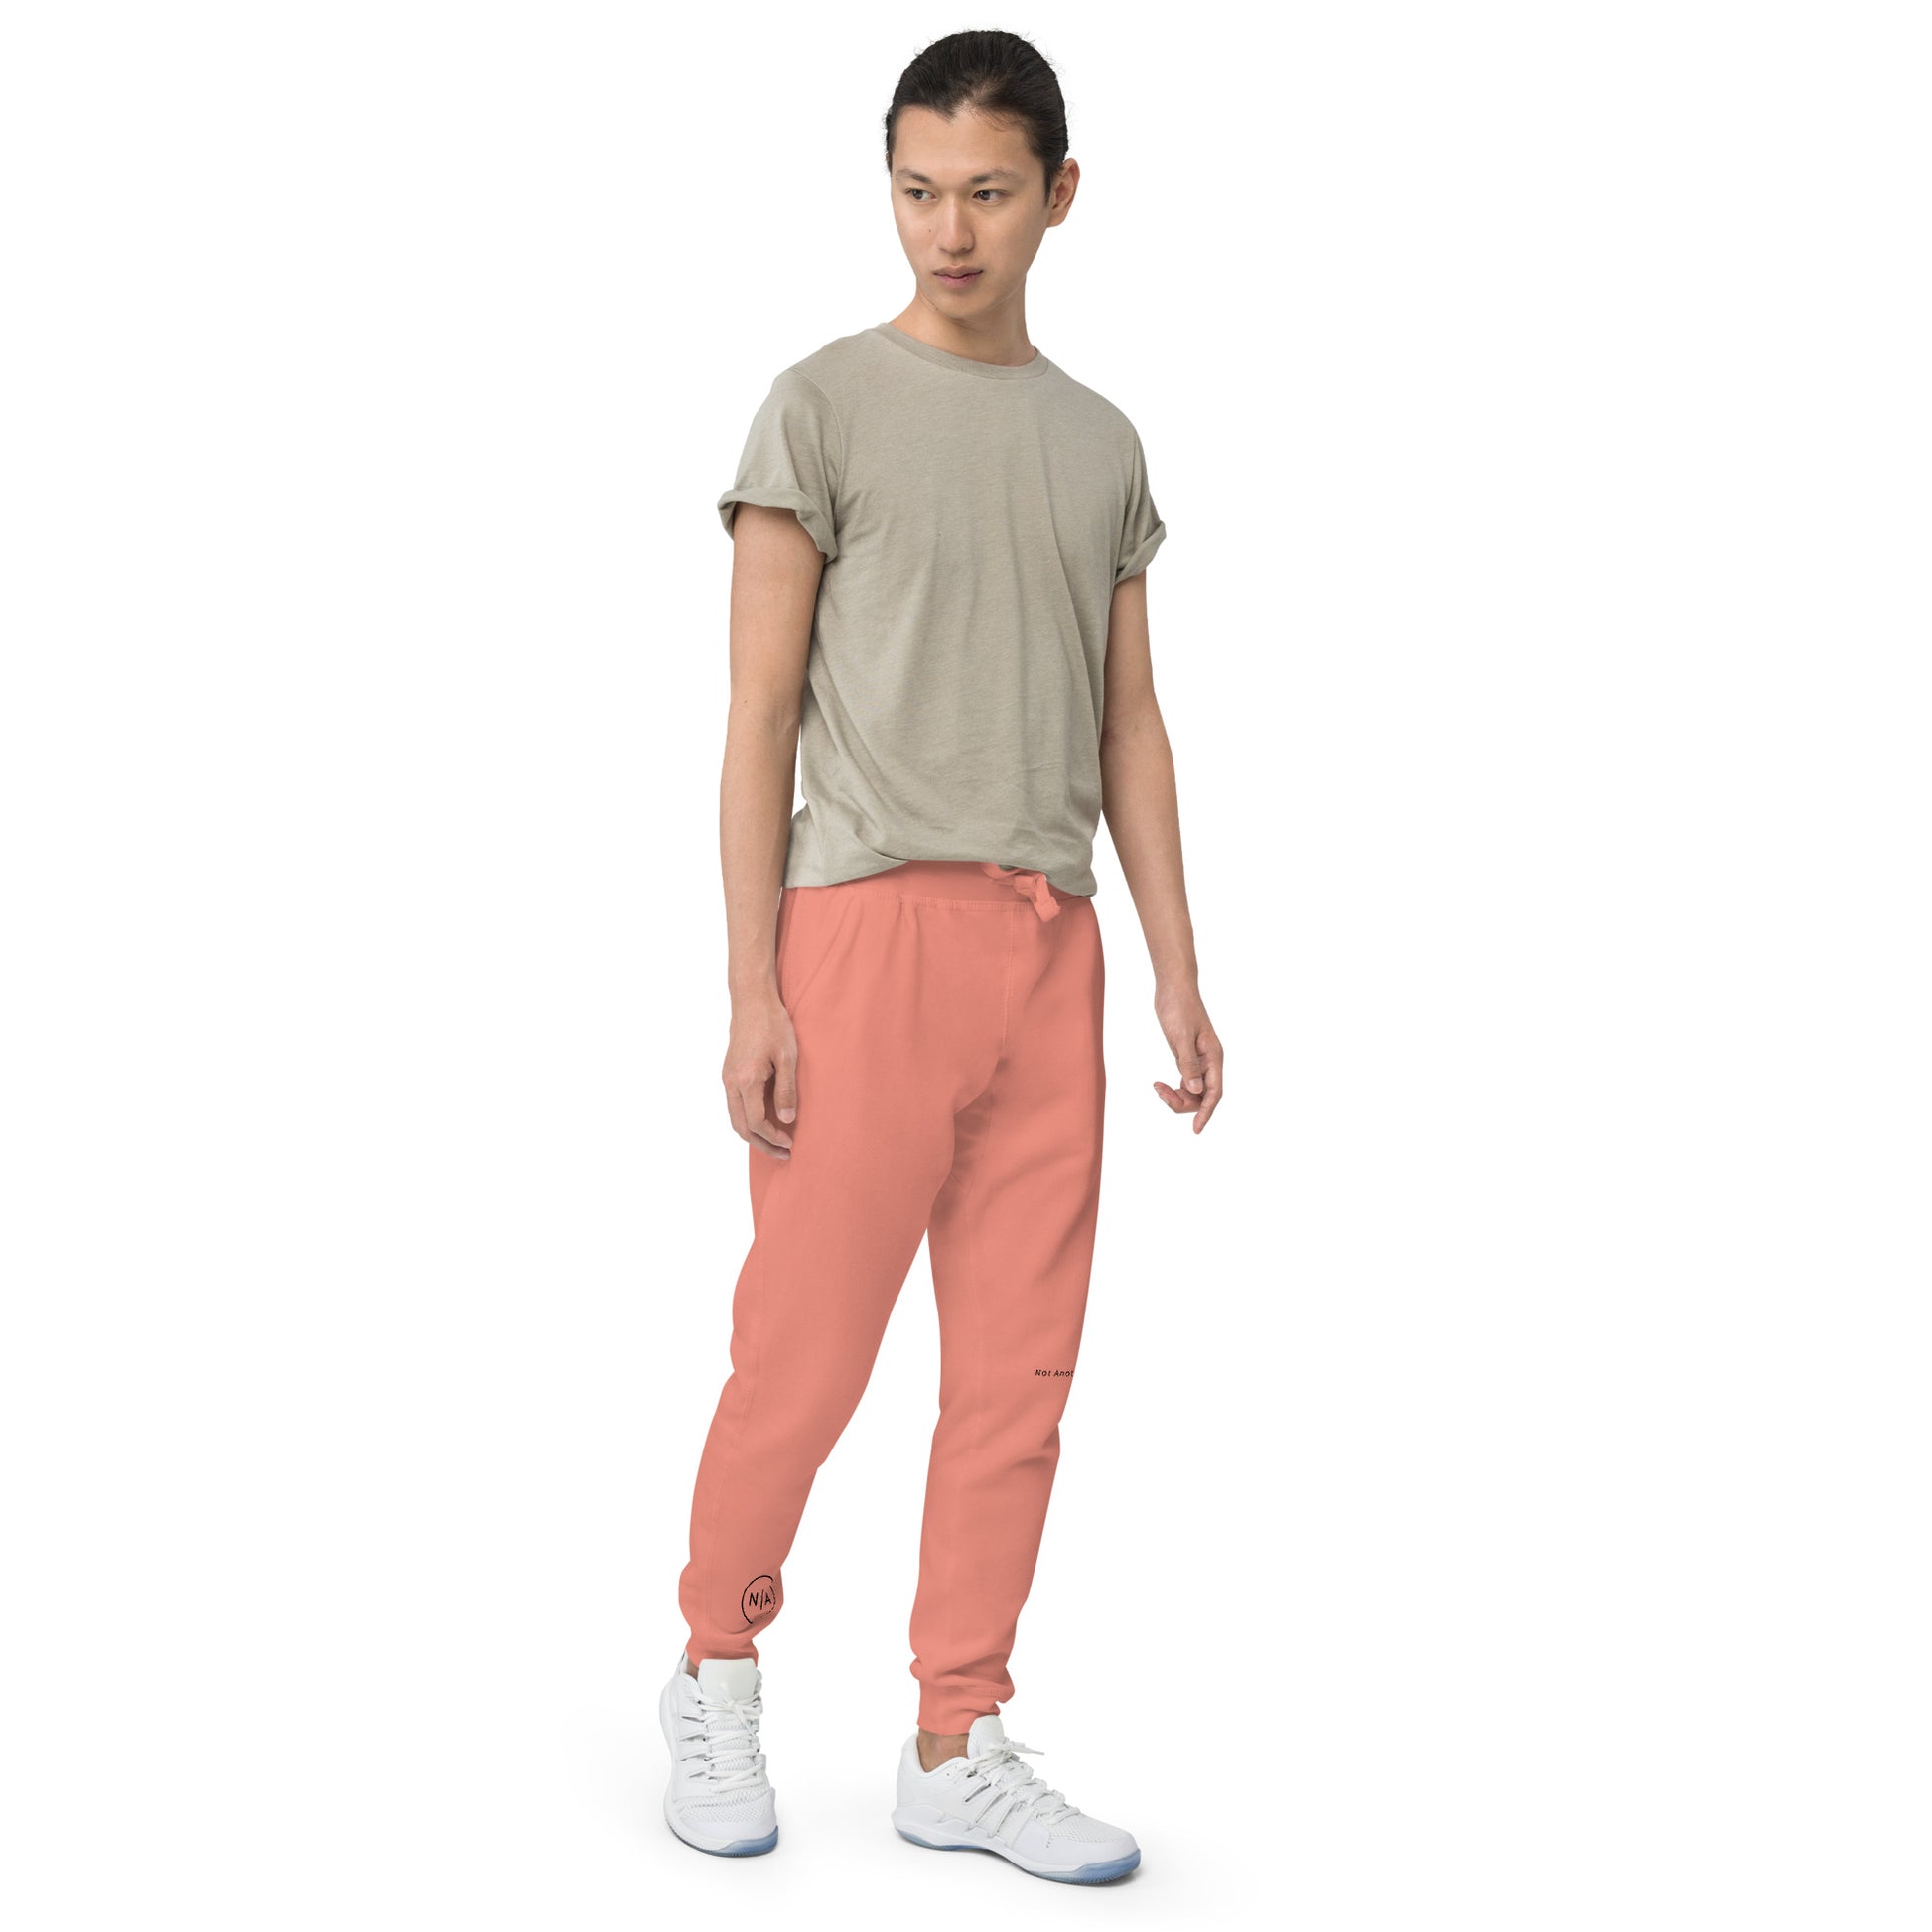 Not Another Fleece sweatpants (Unisex) - Not Another Store